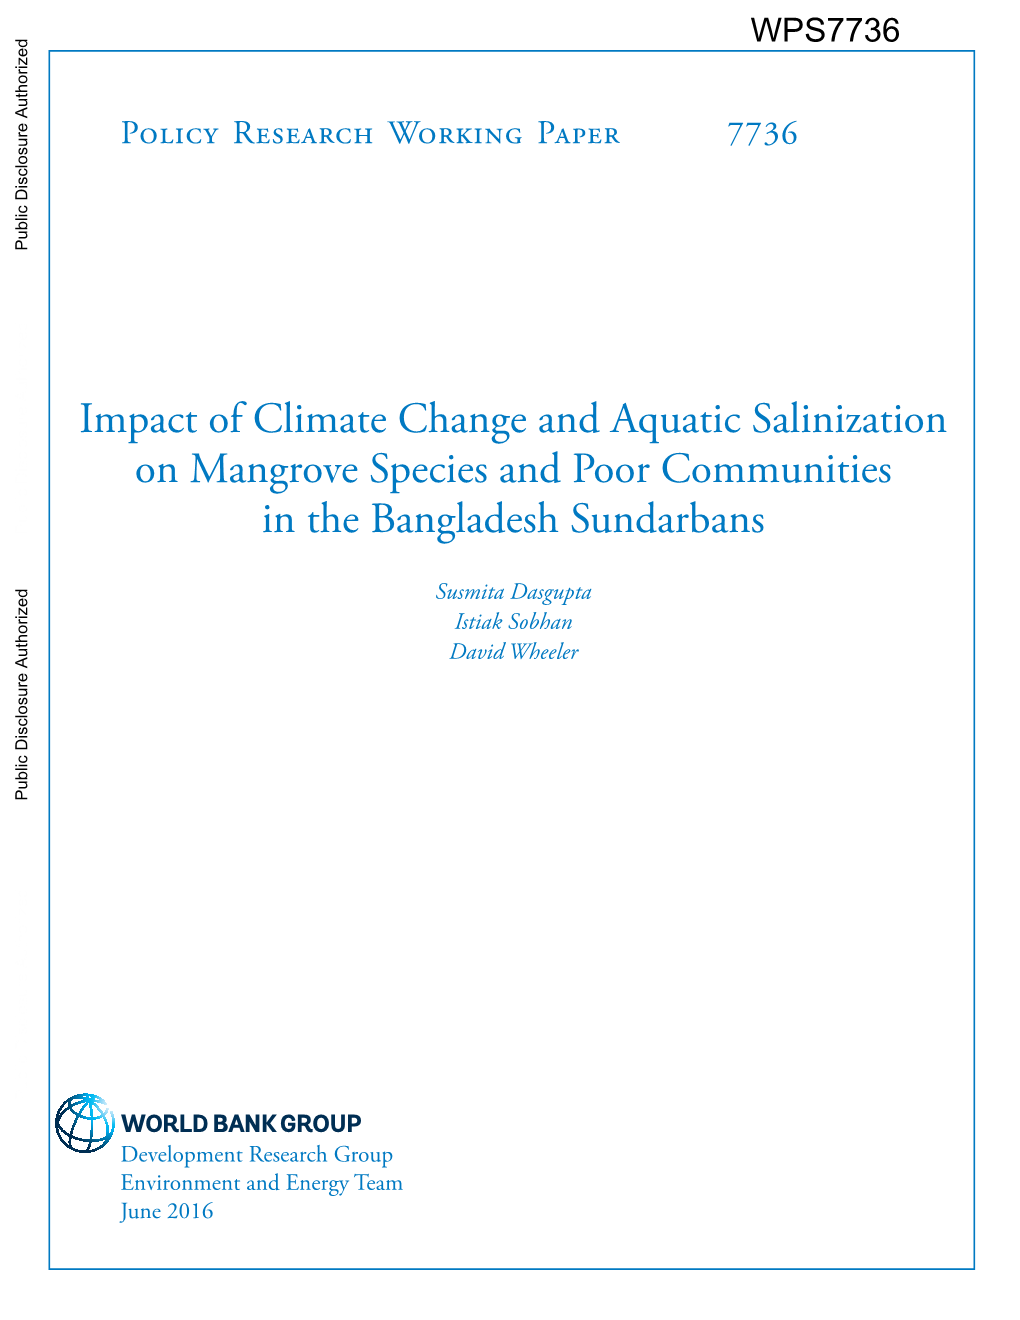 Impact of Climate Change and Aquatic Salinization on Mangrove Species and Poor Communities